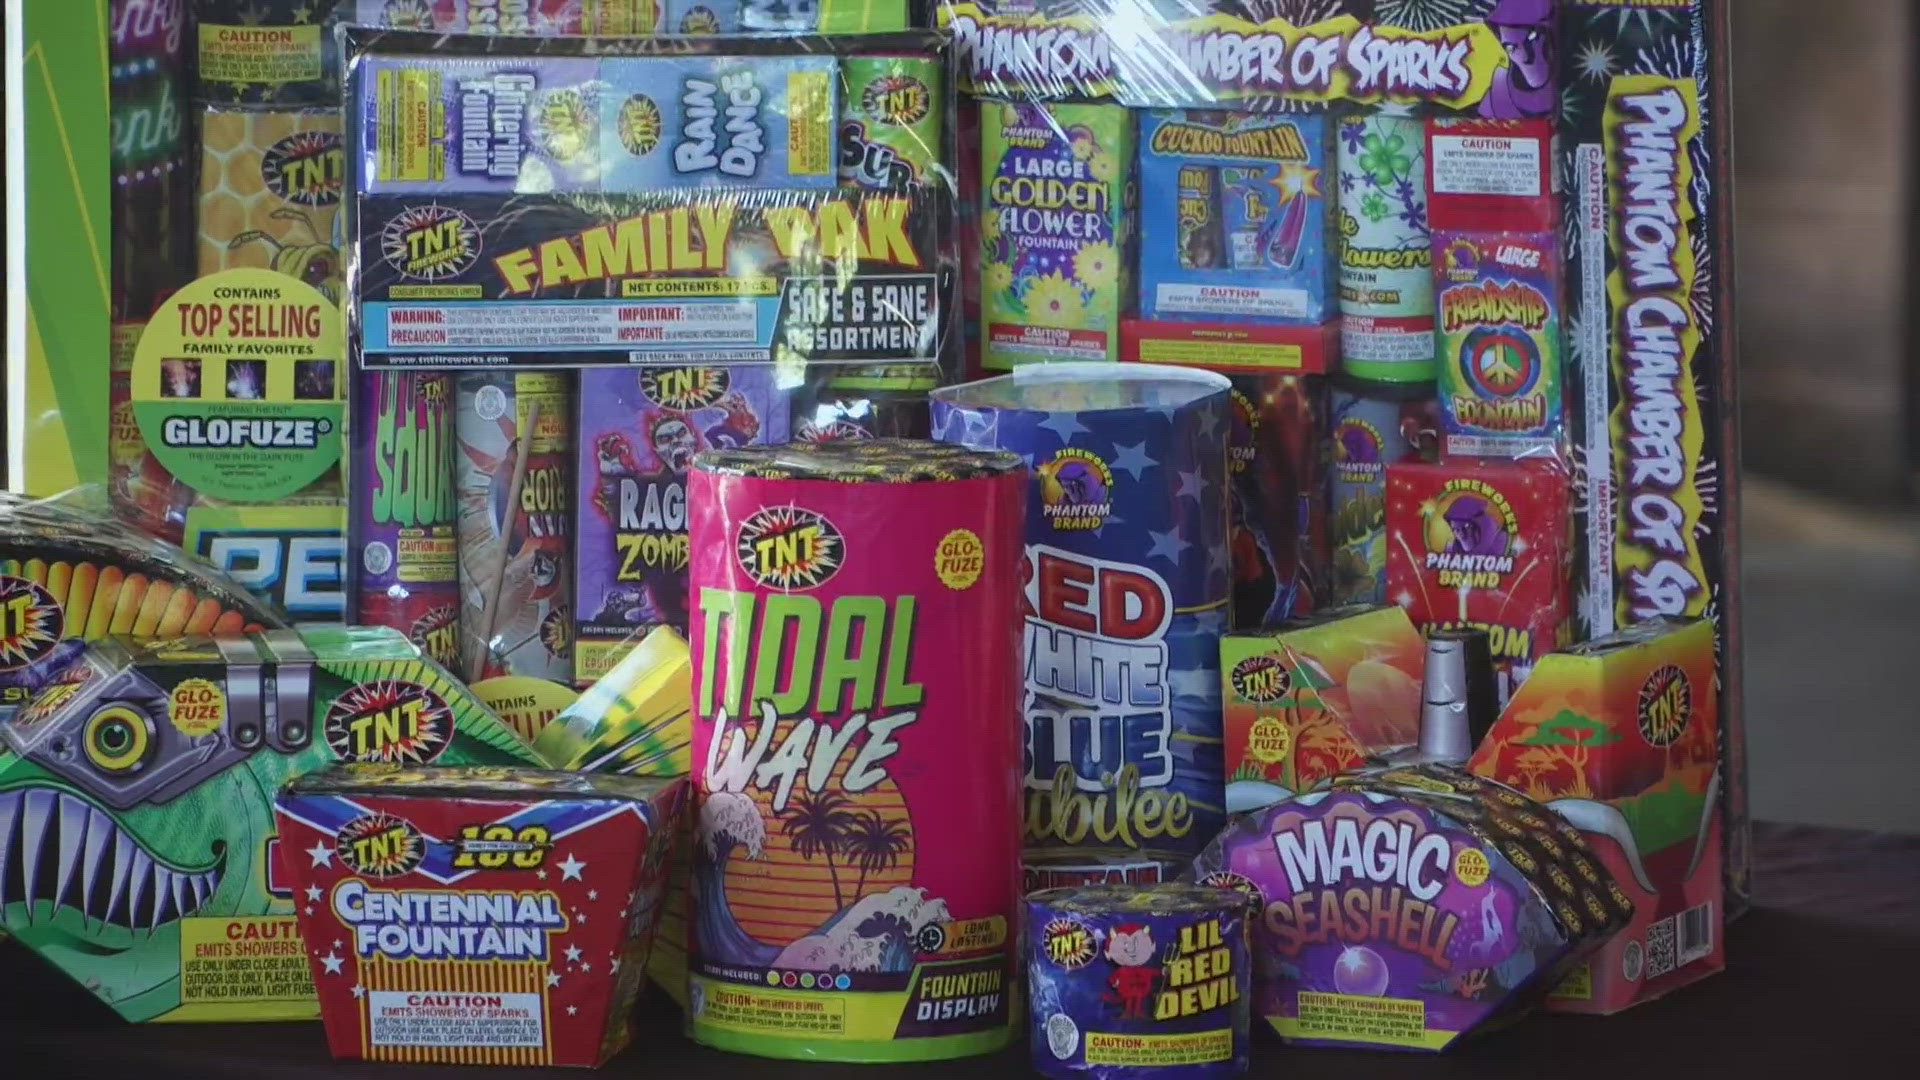 The hot, dry and windy conditions are a recipe for grass fires. The sales window for California's legal "Safe and Sane" fireworks adds another ingredient.